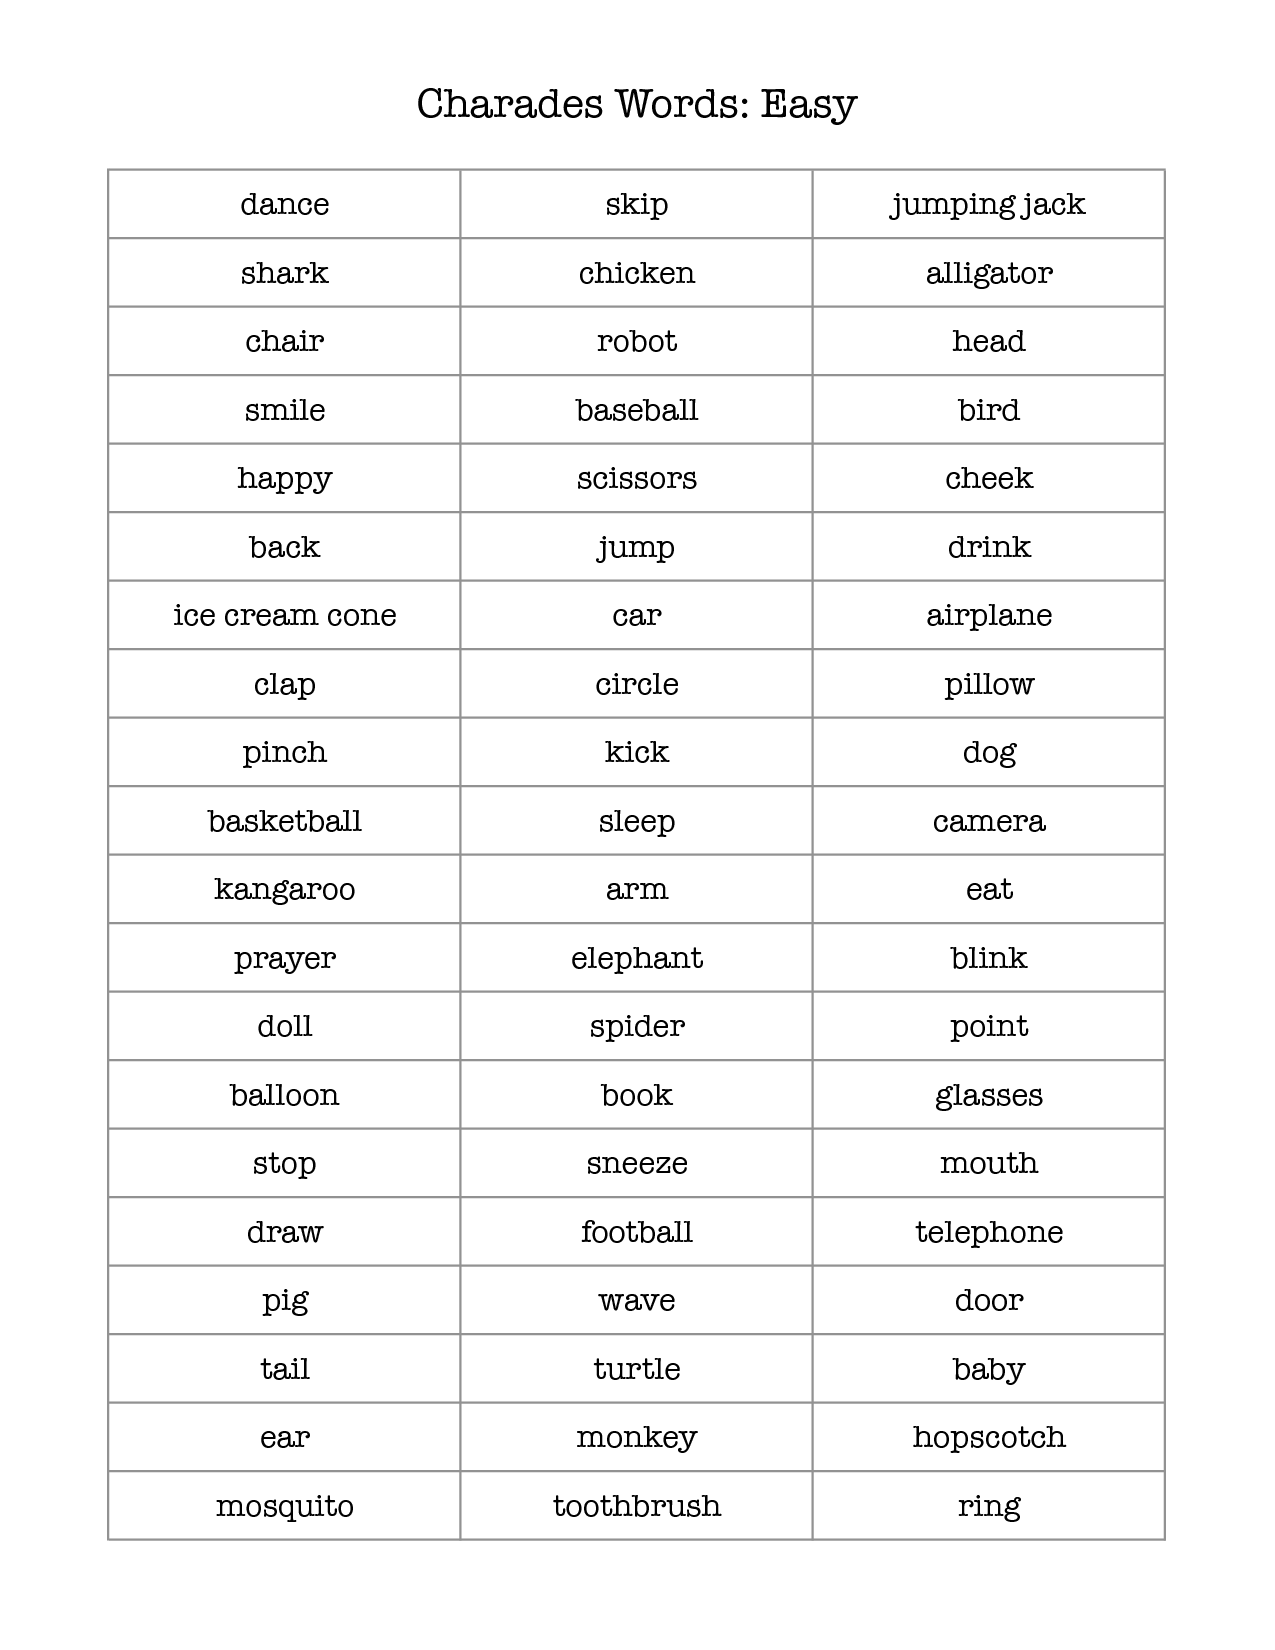 list-printable-images-gallery-category-page-20-printablee